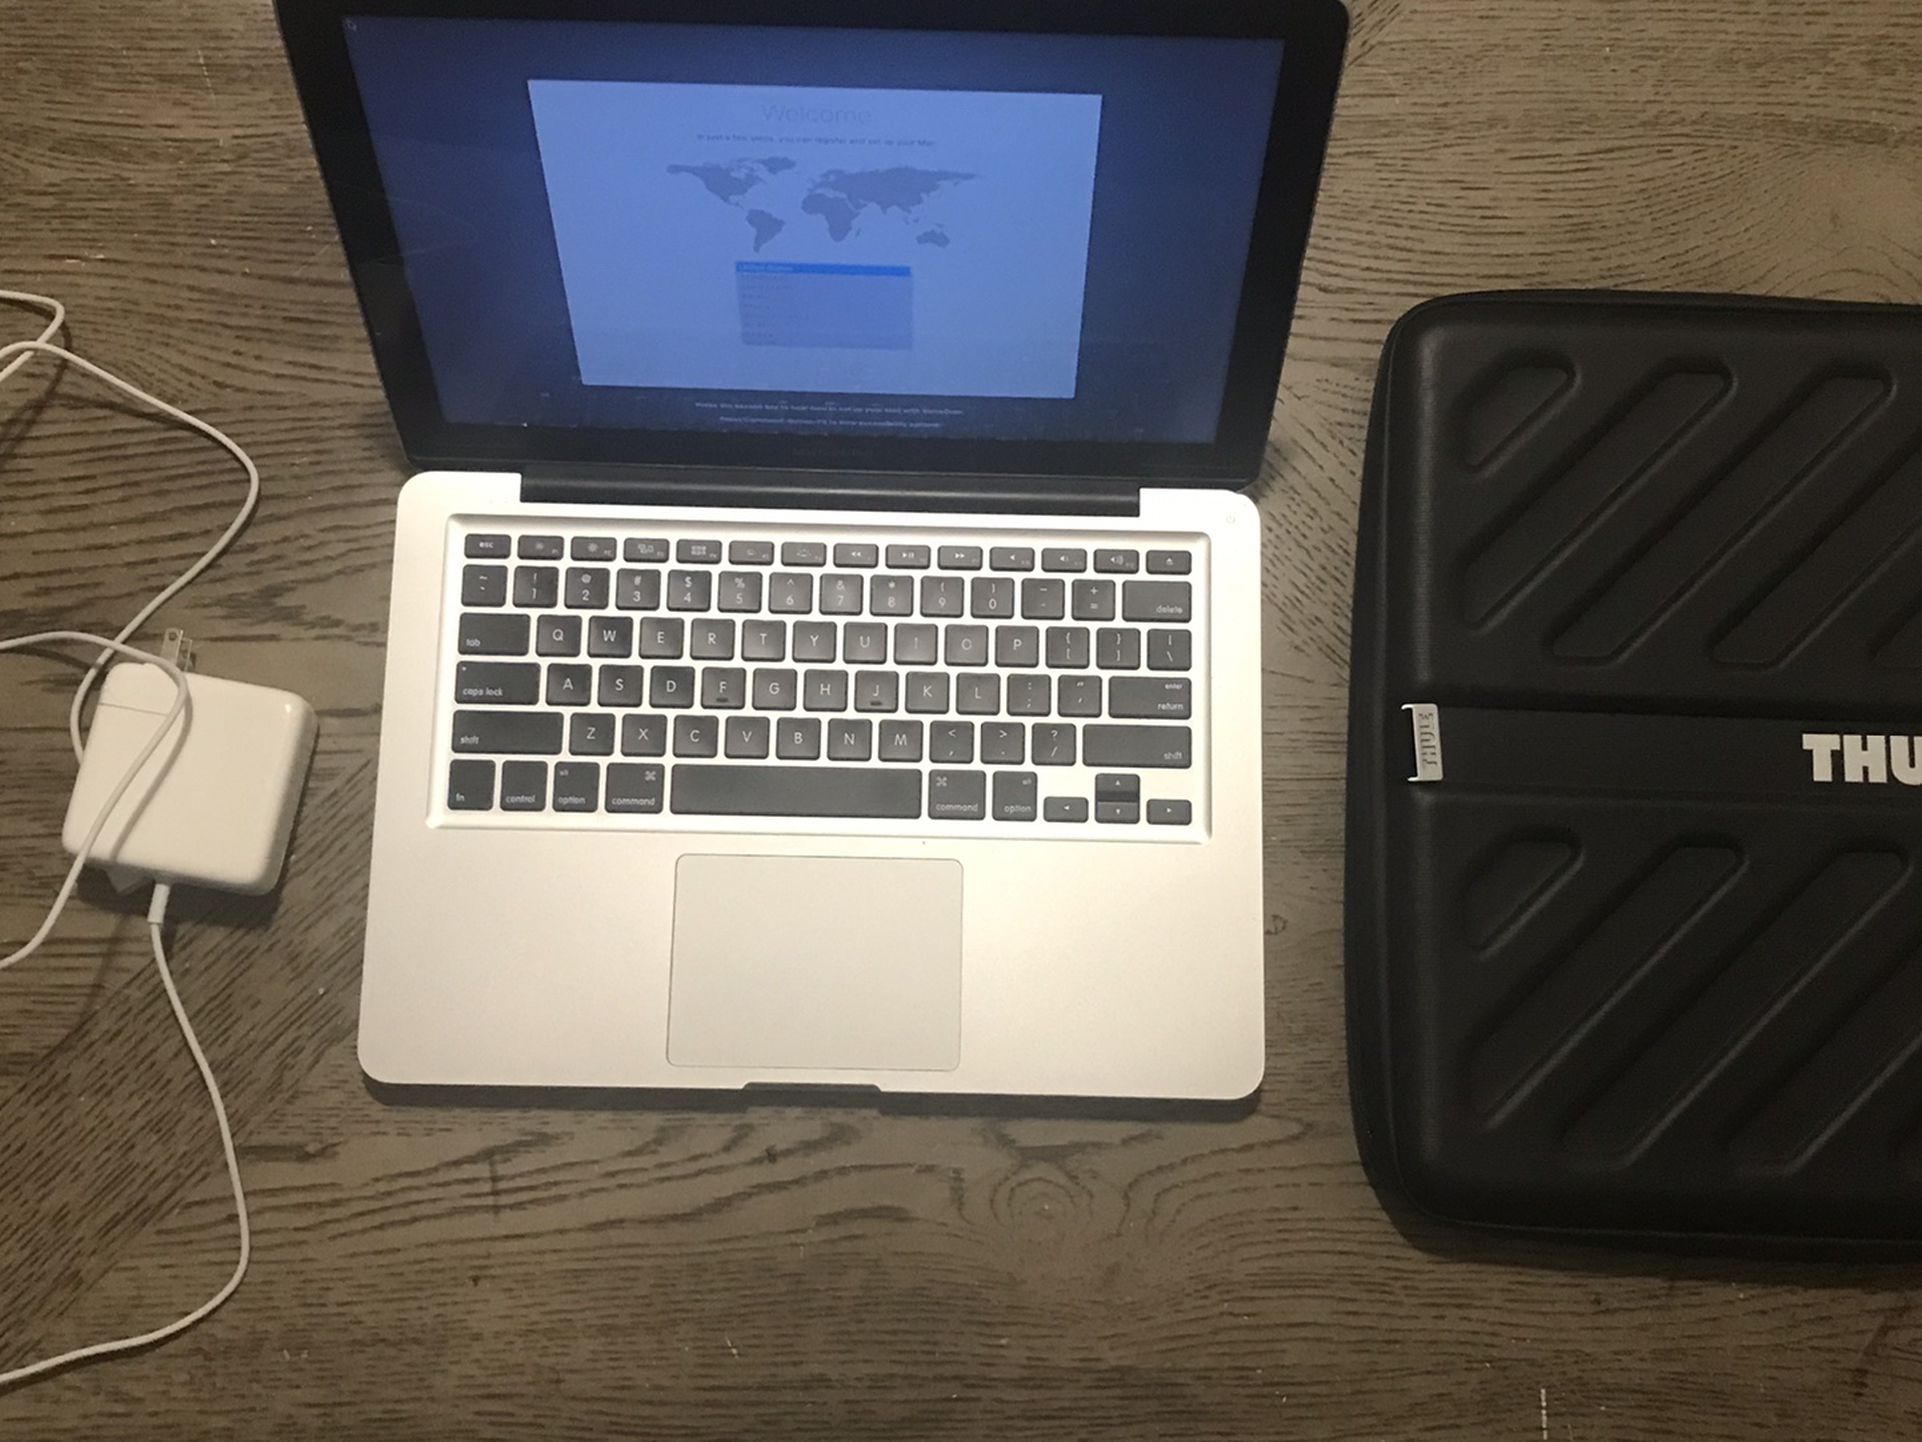 2012 APPLE MACBOOK PRO 500GB 4G RAM I5 INTEL GOOD CONDITION CHARGER & CASE INCLUDED